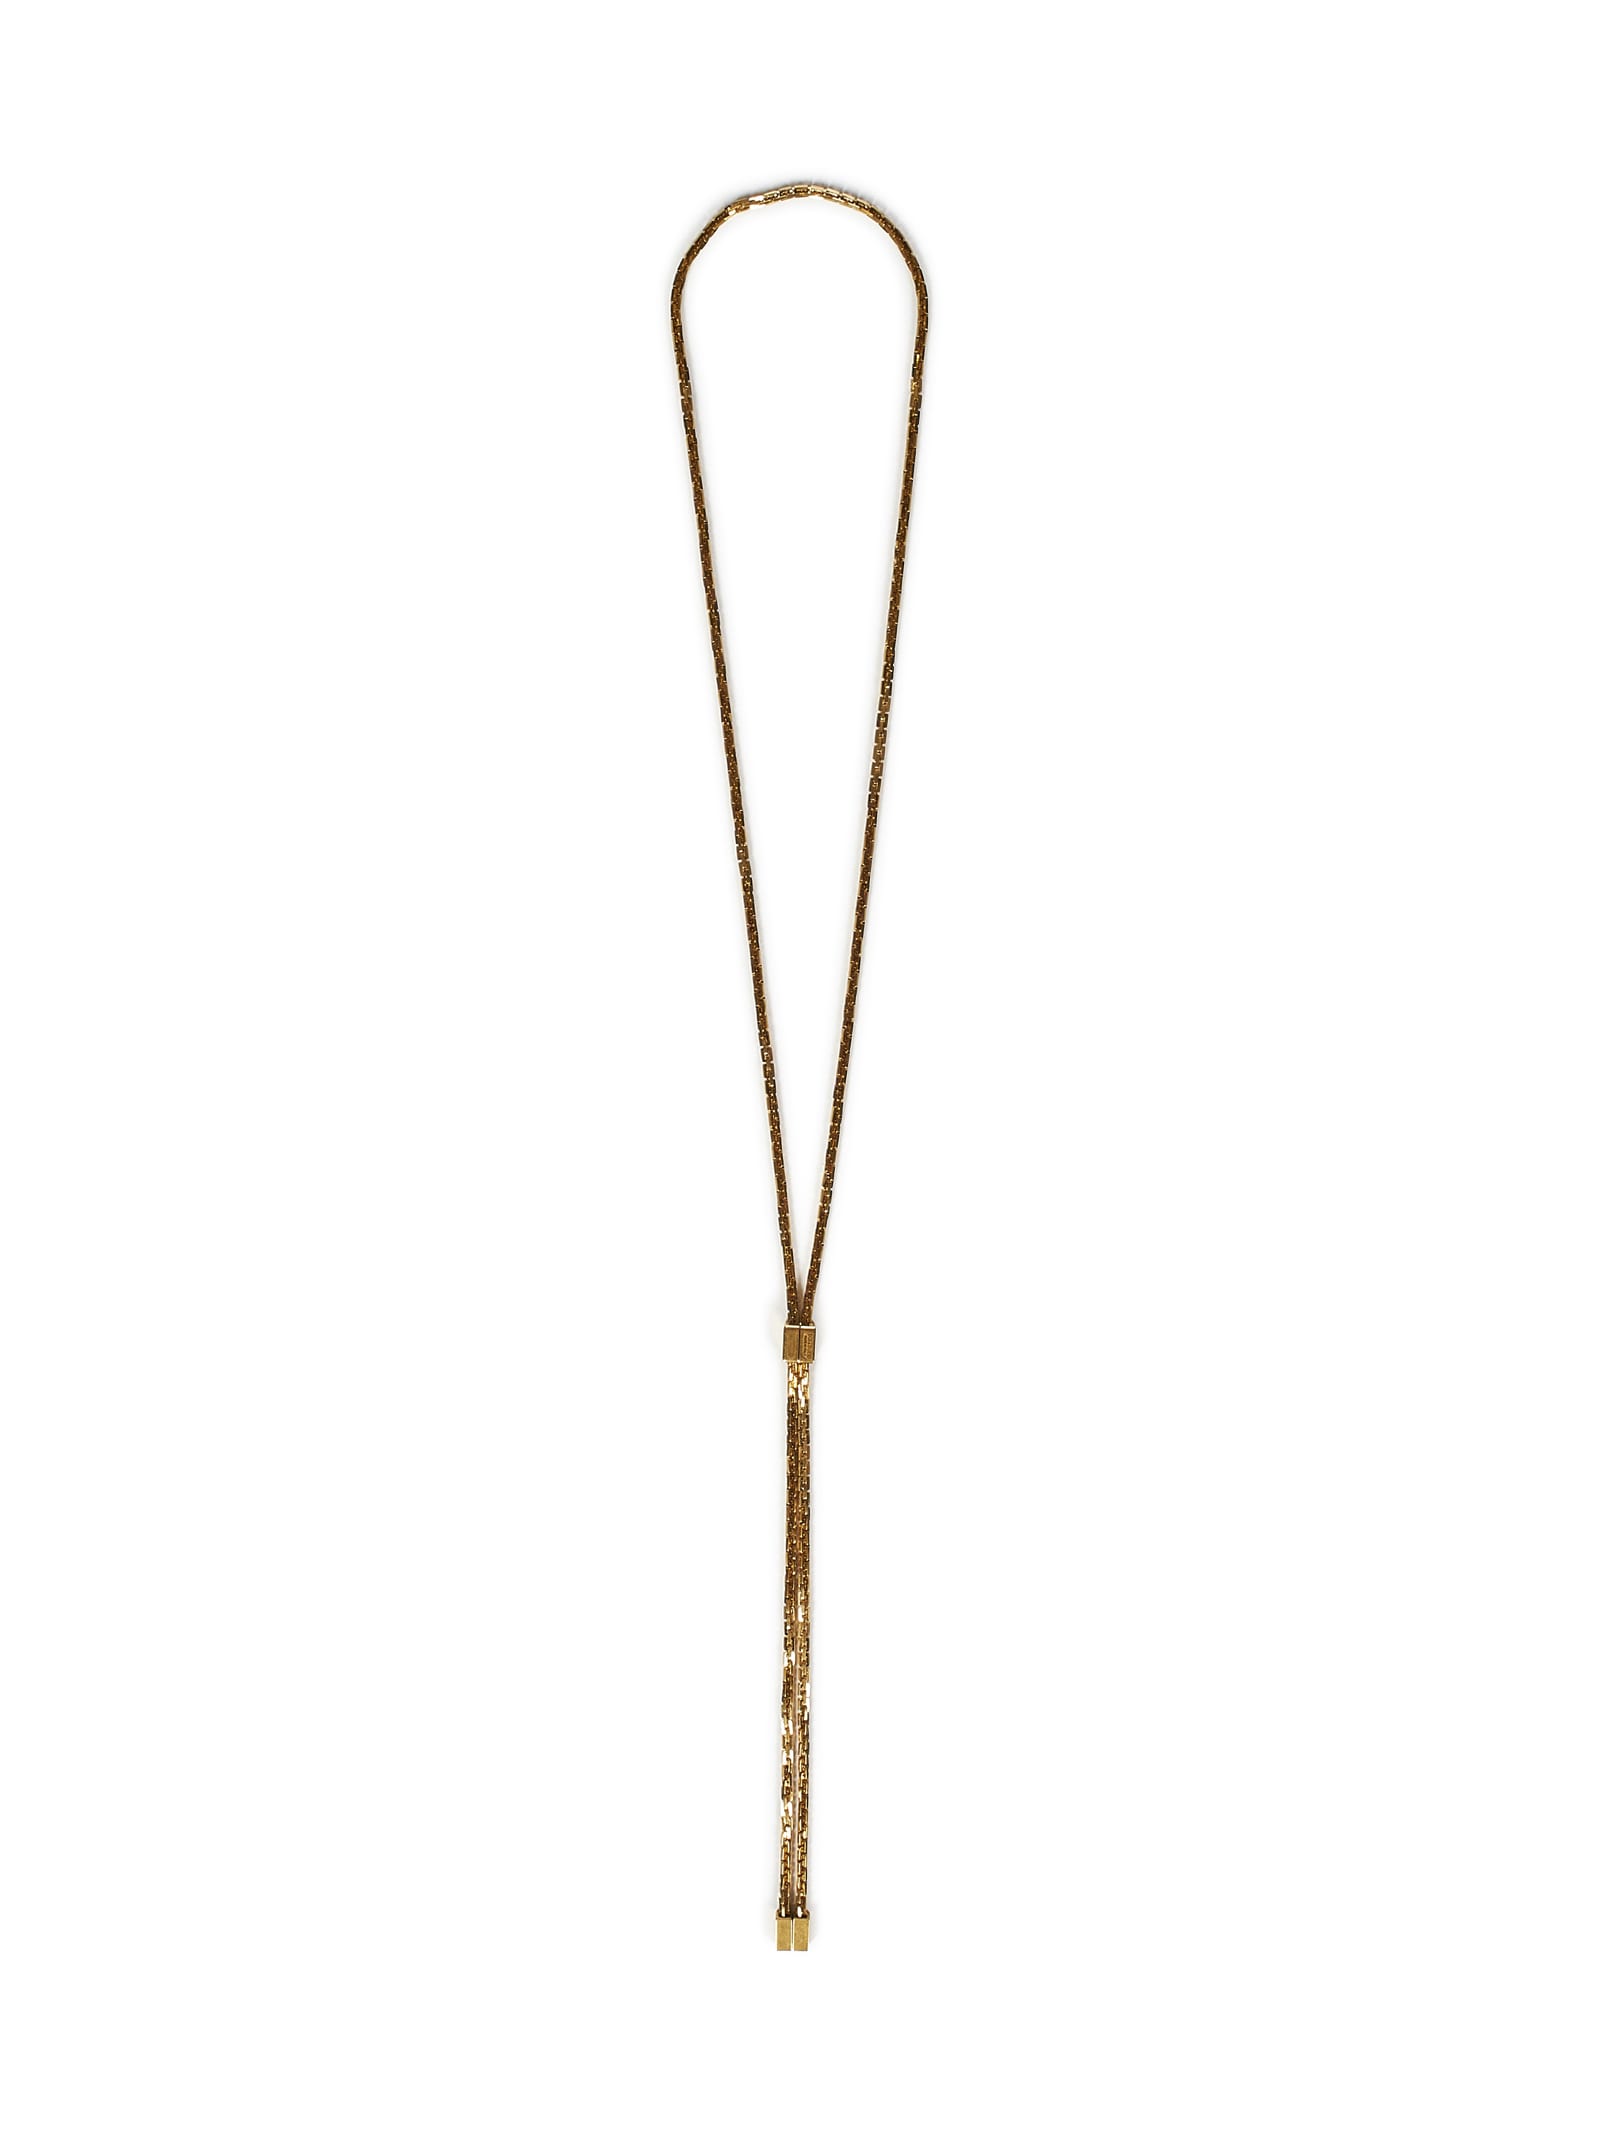 Tom Ford Bianca Necklace In Golden